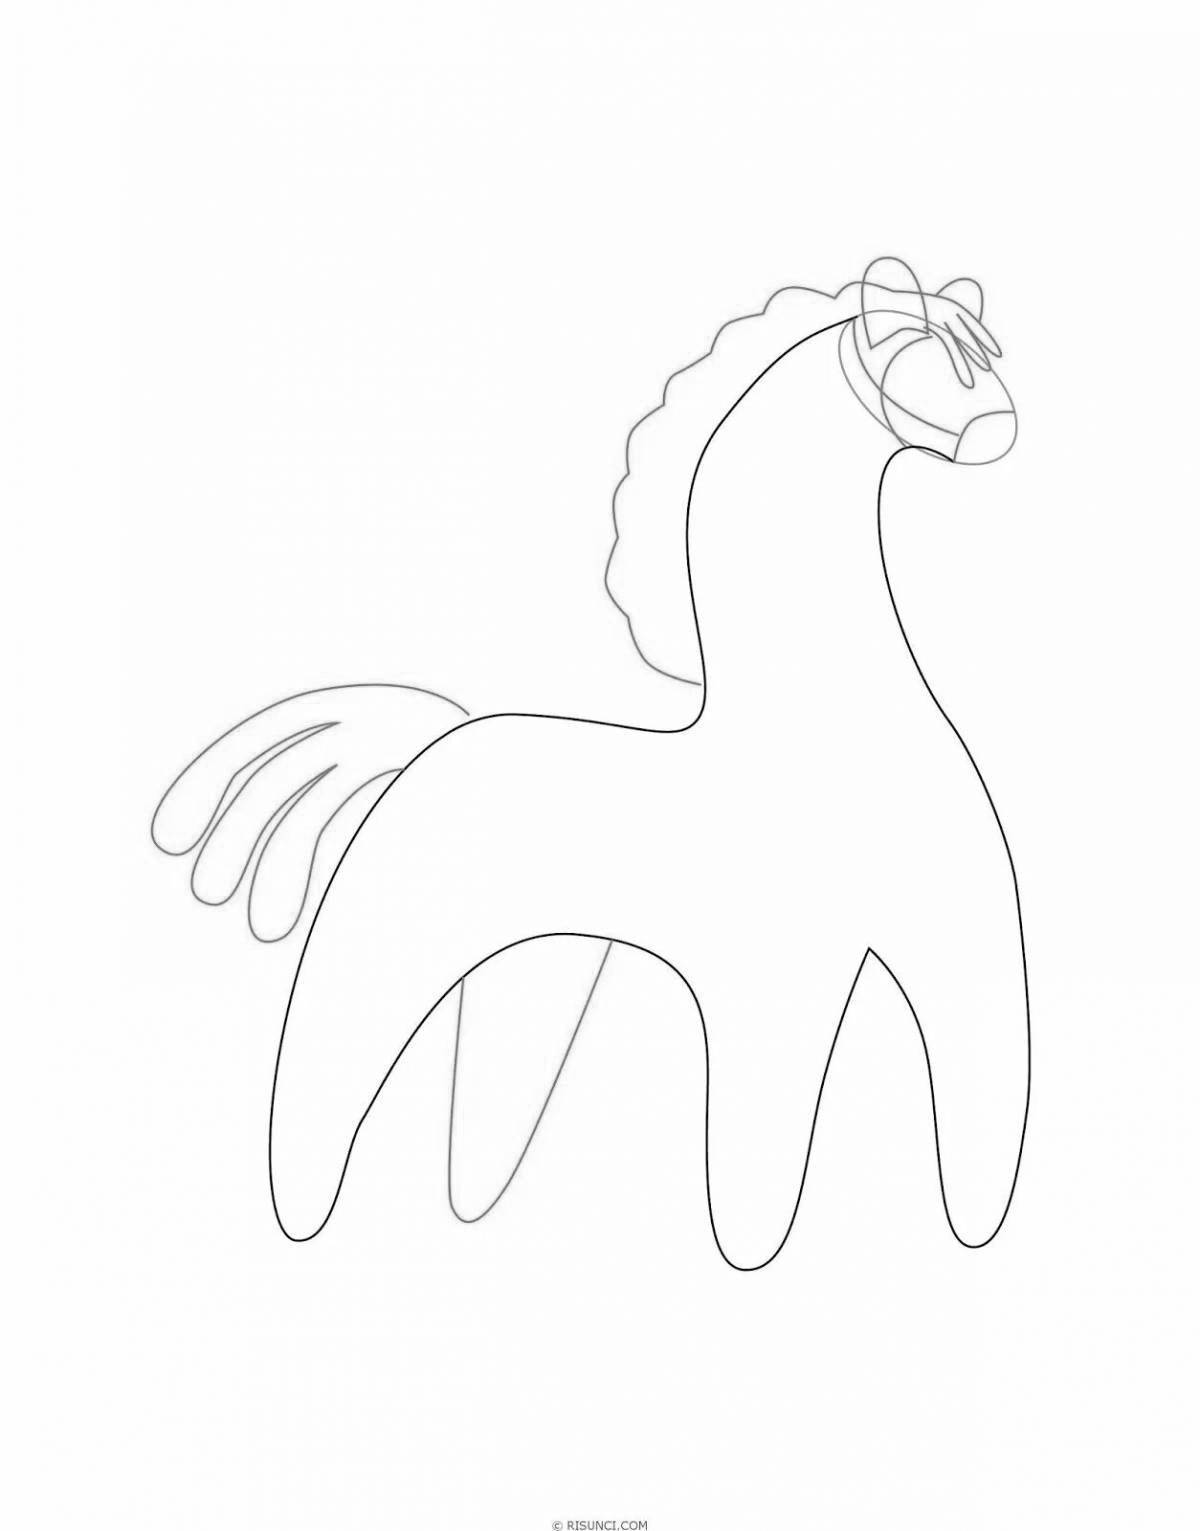 Fairy horse coloring book for kids